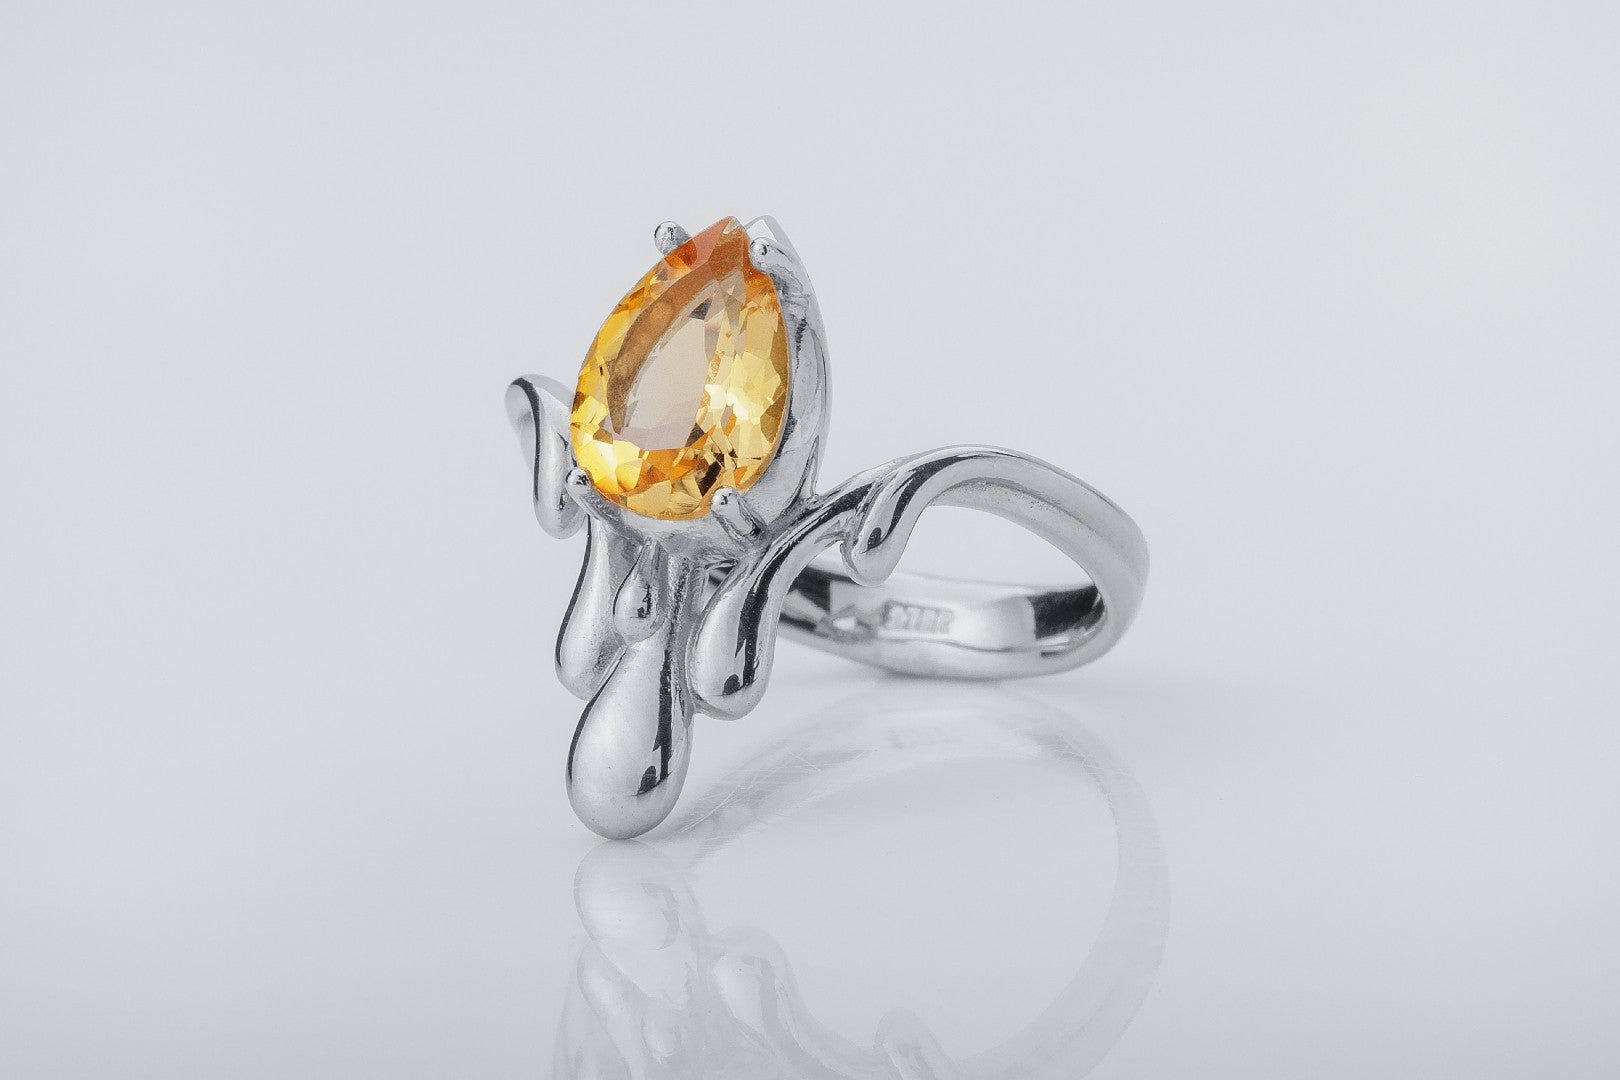 Candle Light Ring with Citrine, Rhodium plated 925 silver